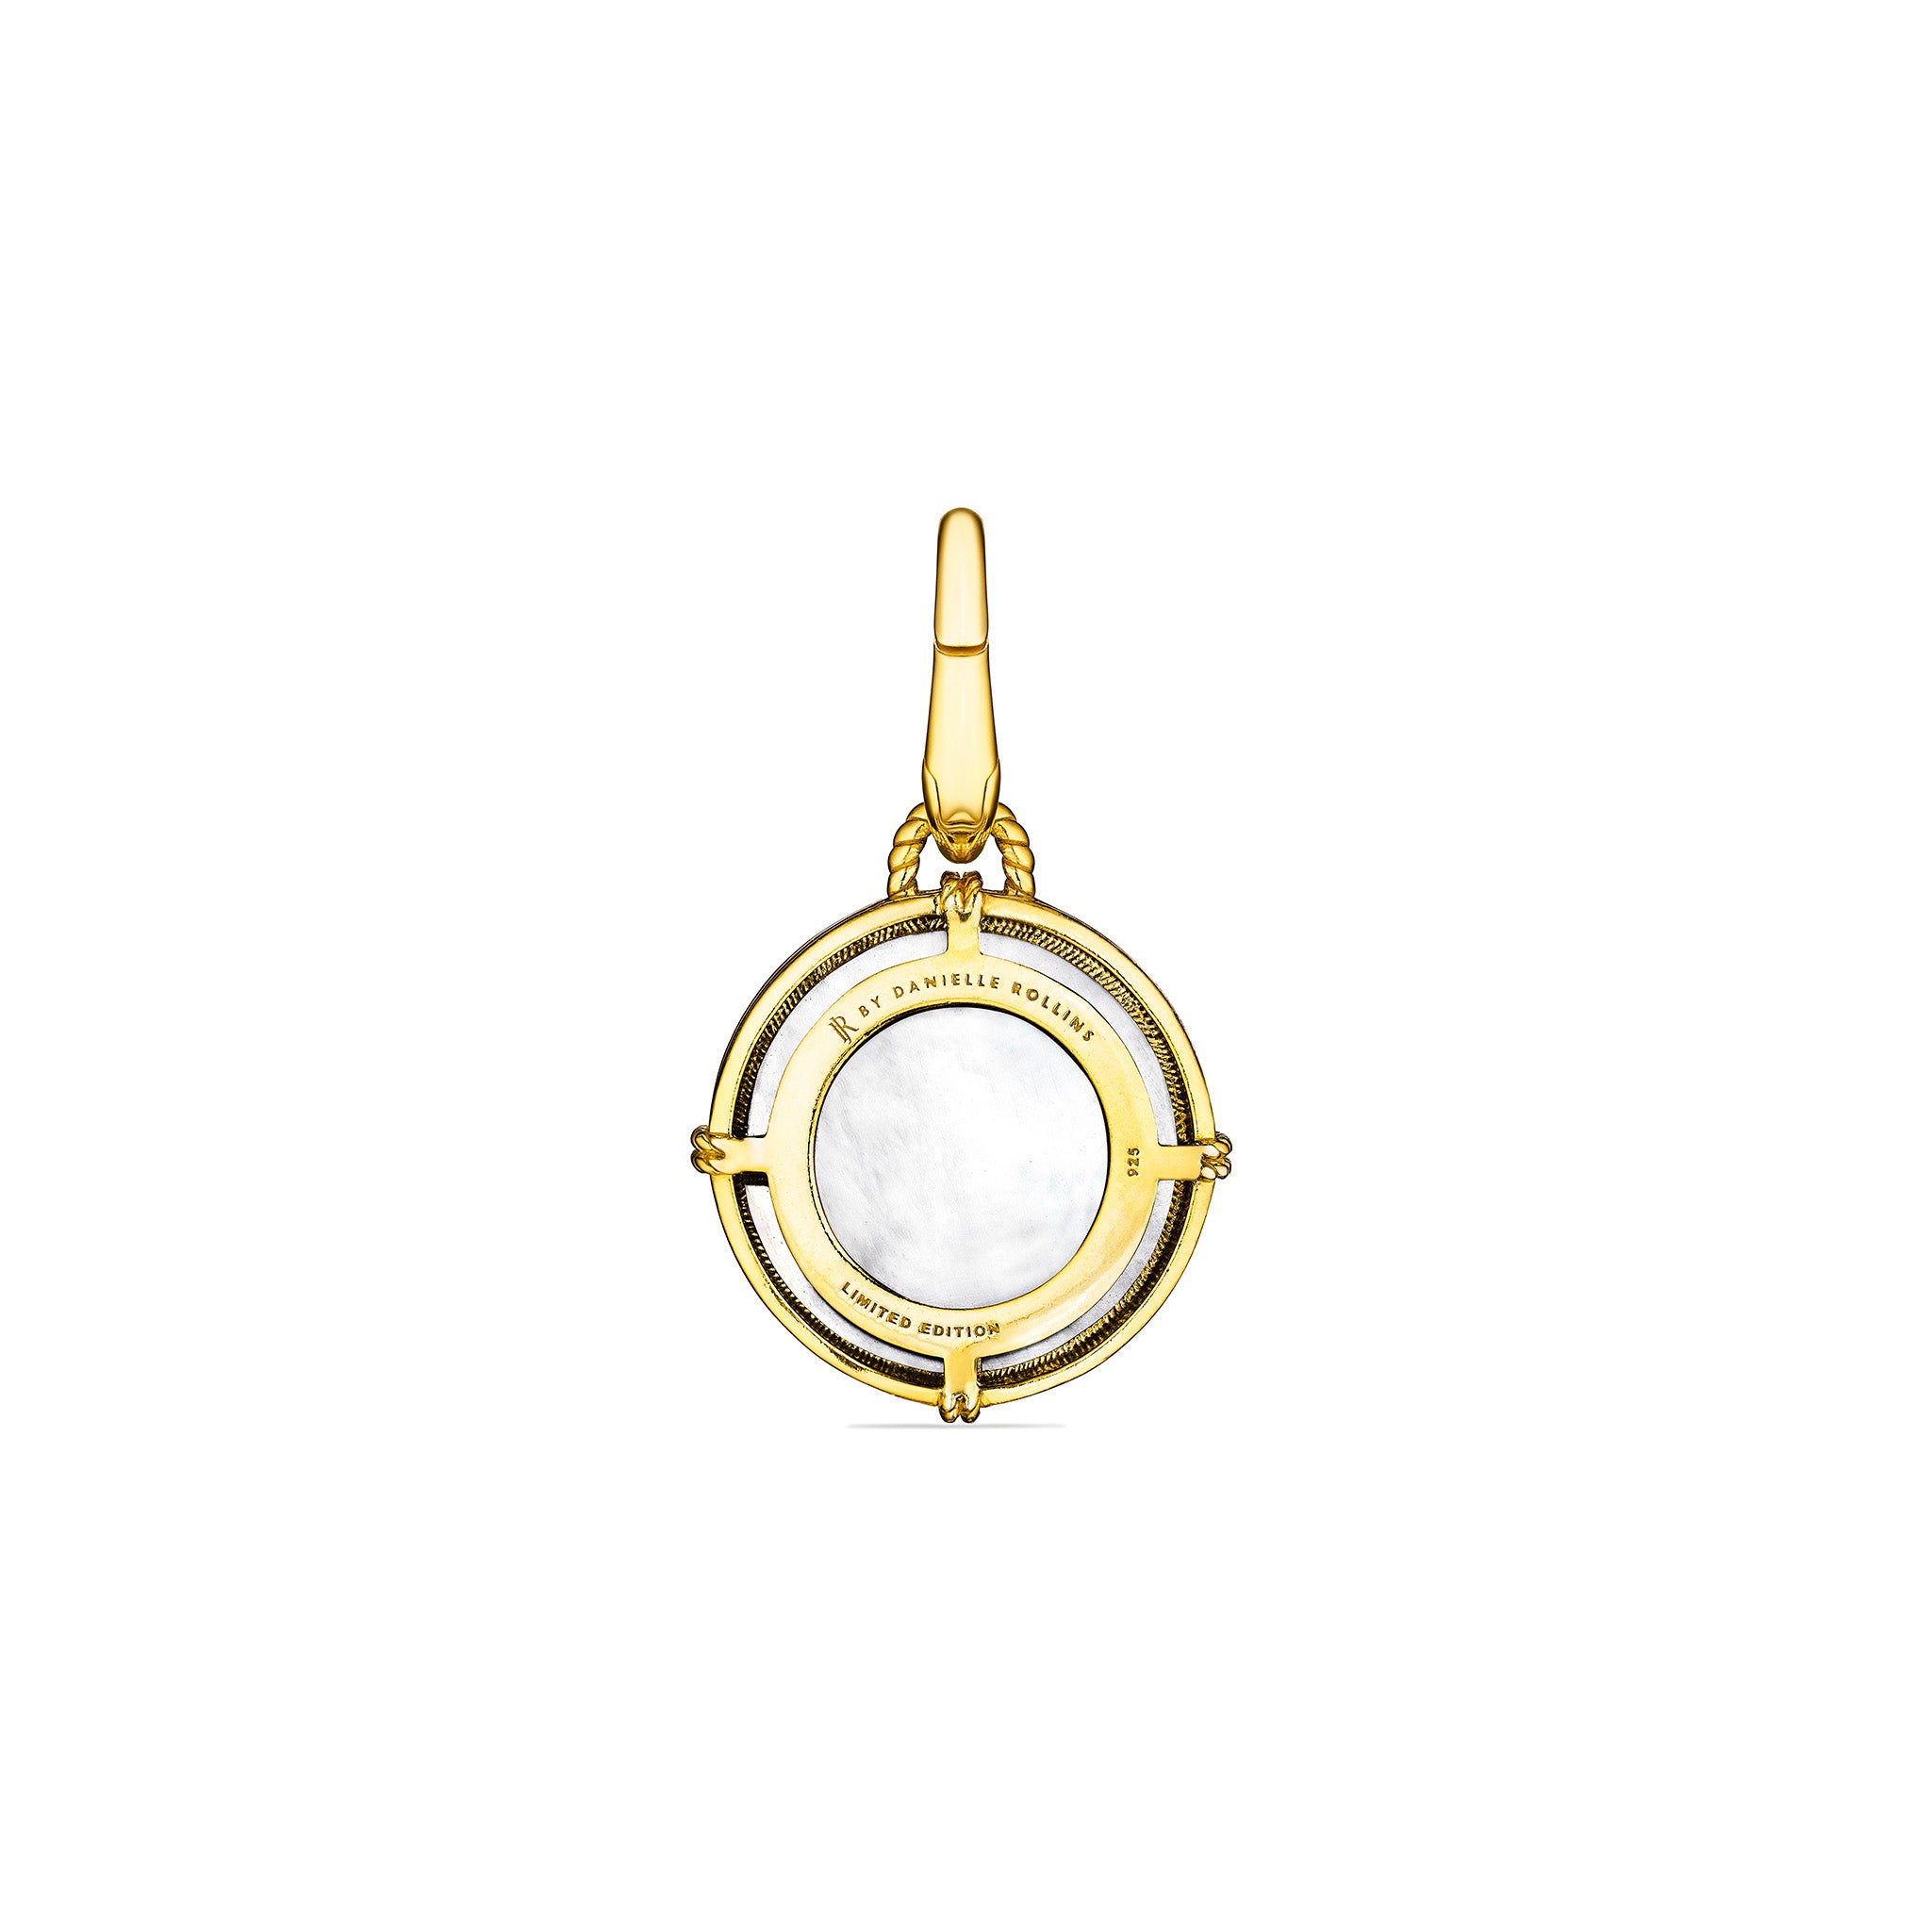 Ocean Reef Sea Shell Medallion with Mother of Pearl in 18K Gold Vermeil